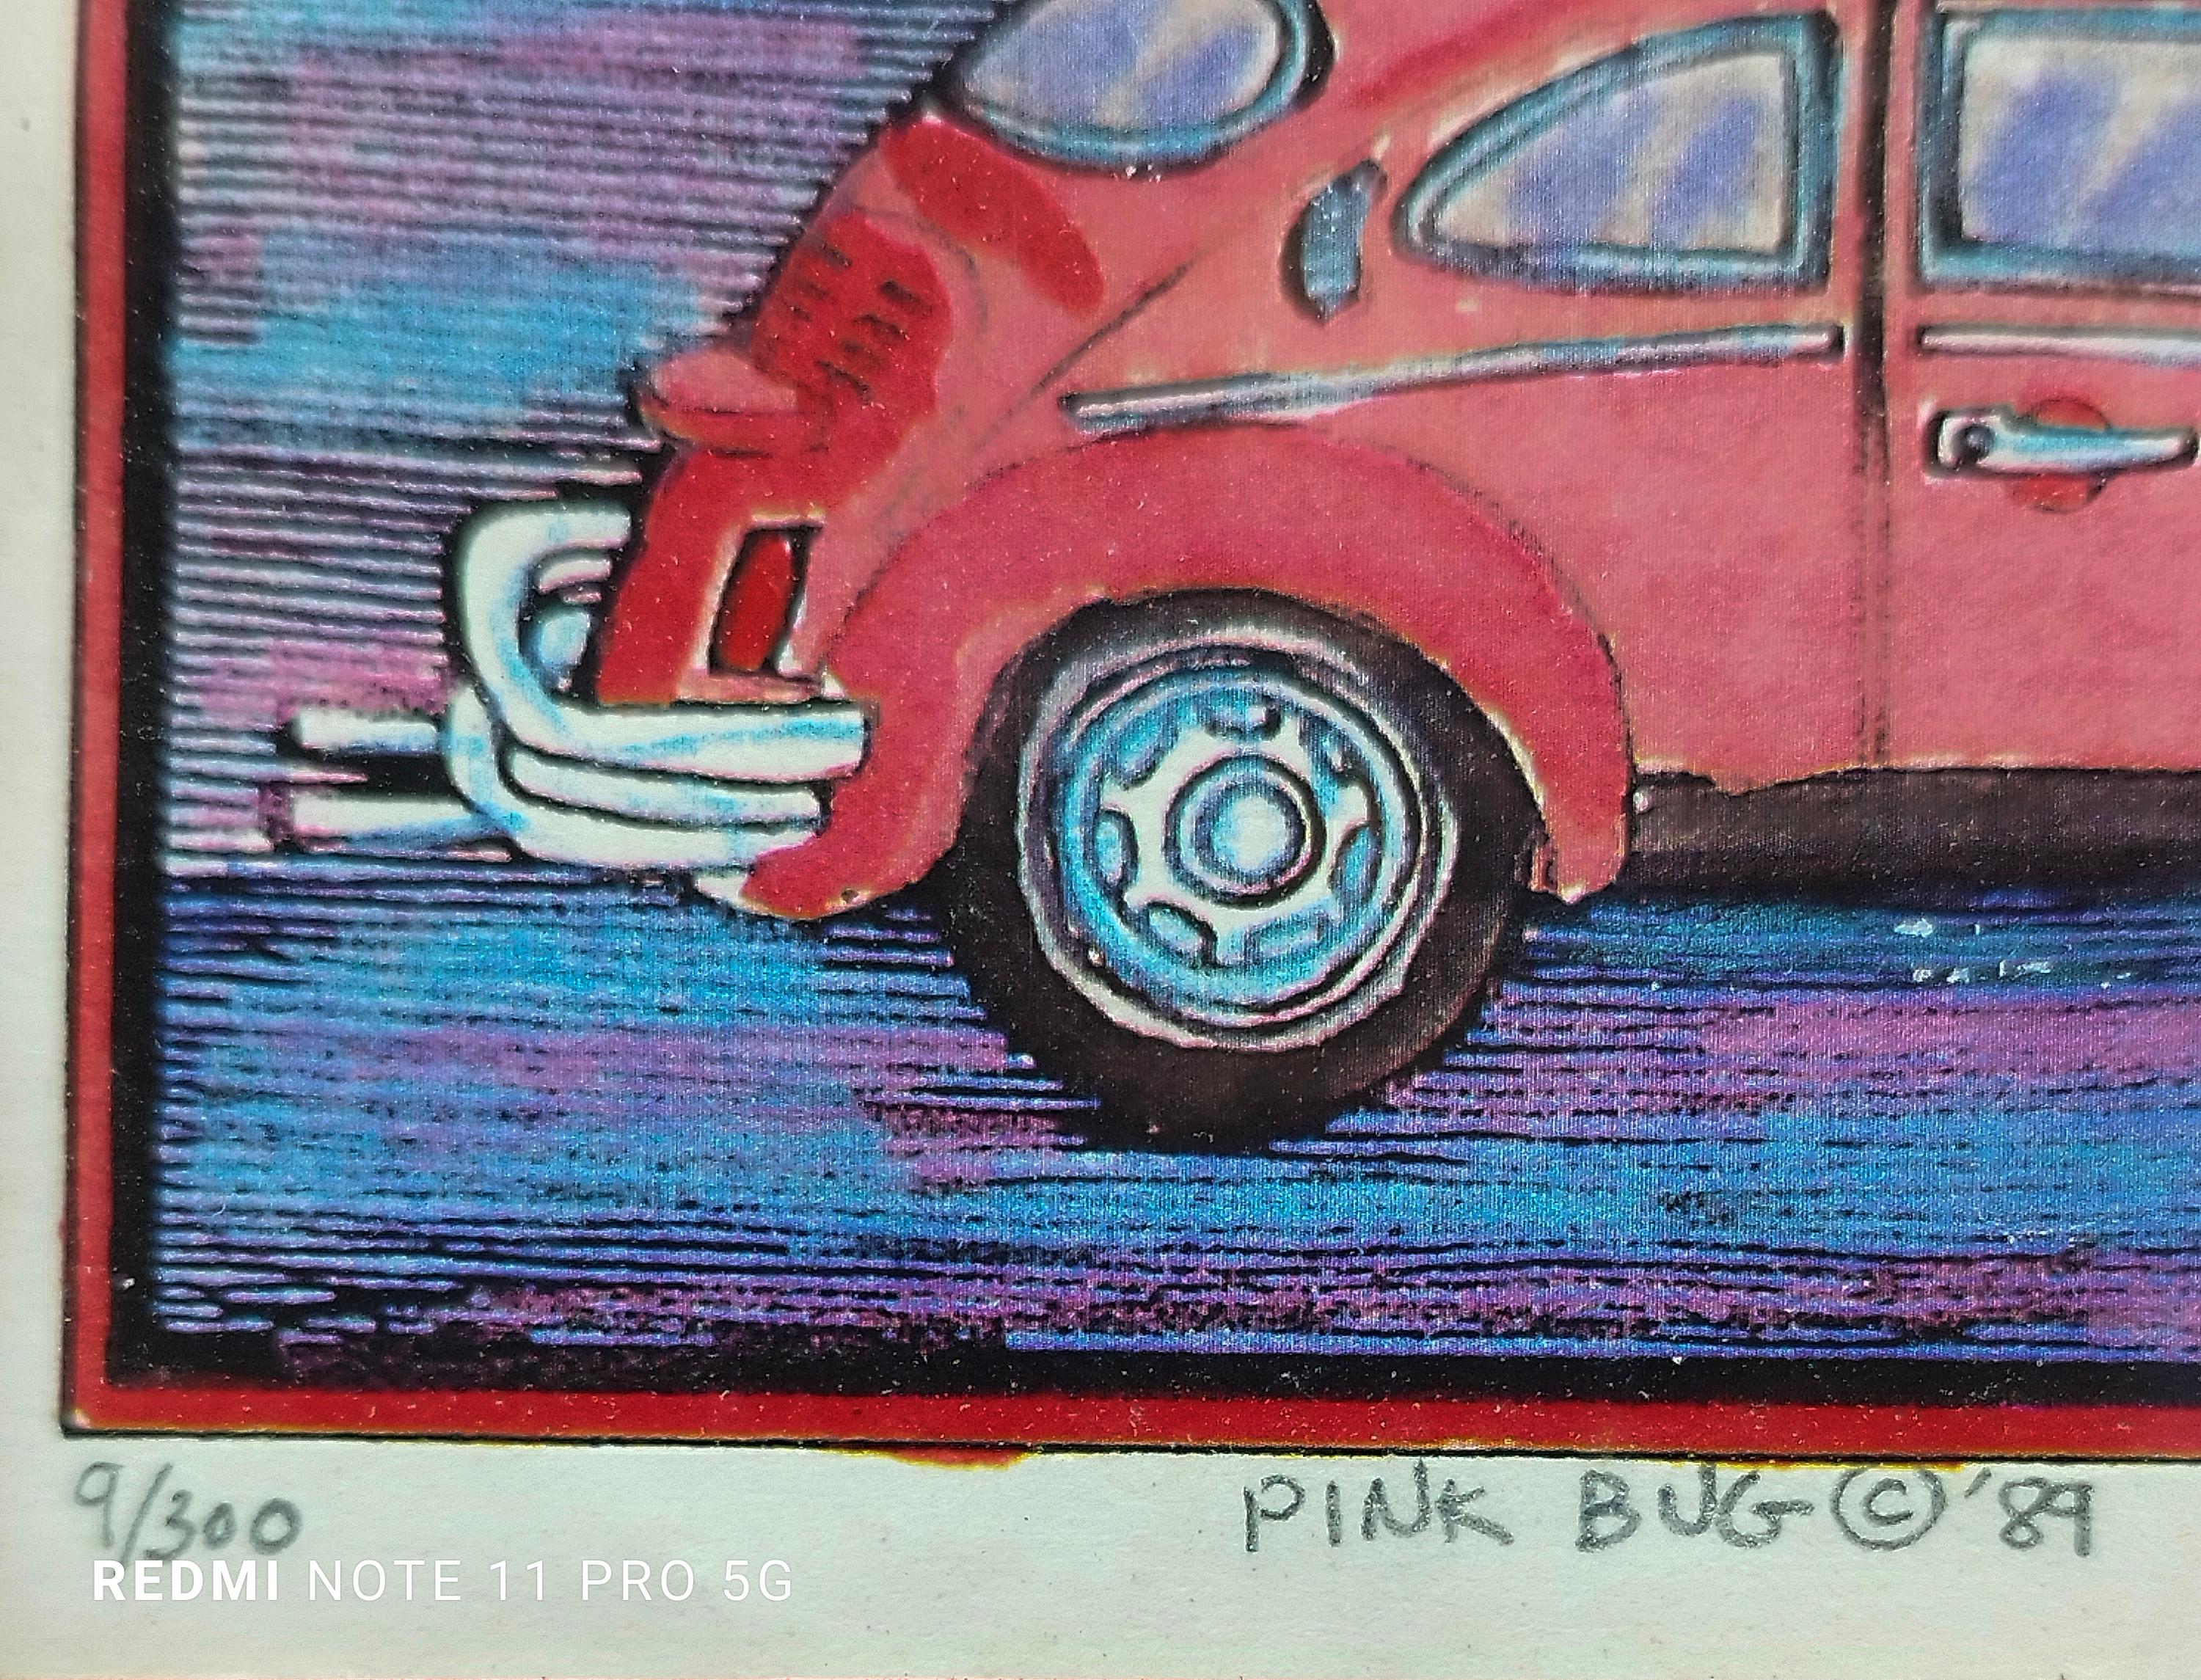 PINK BUG - Ink drawing by Robert Clarence, 1989 For Sale 1